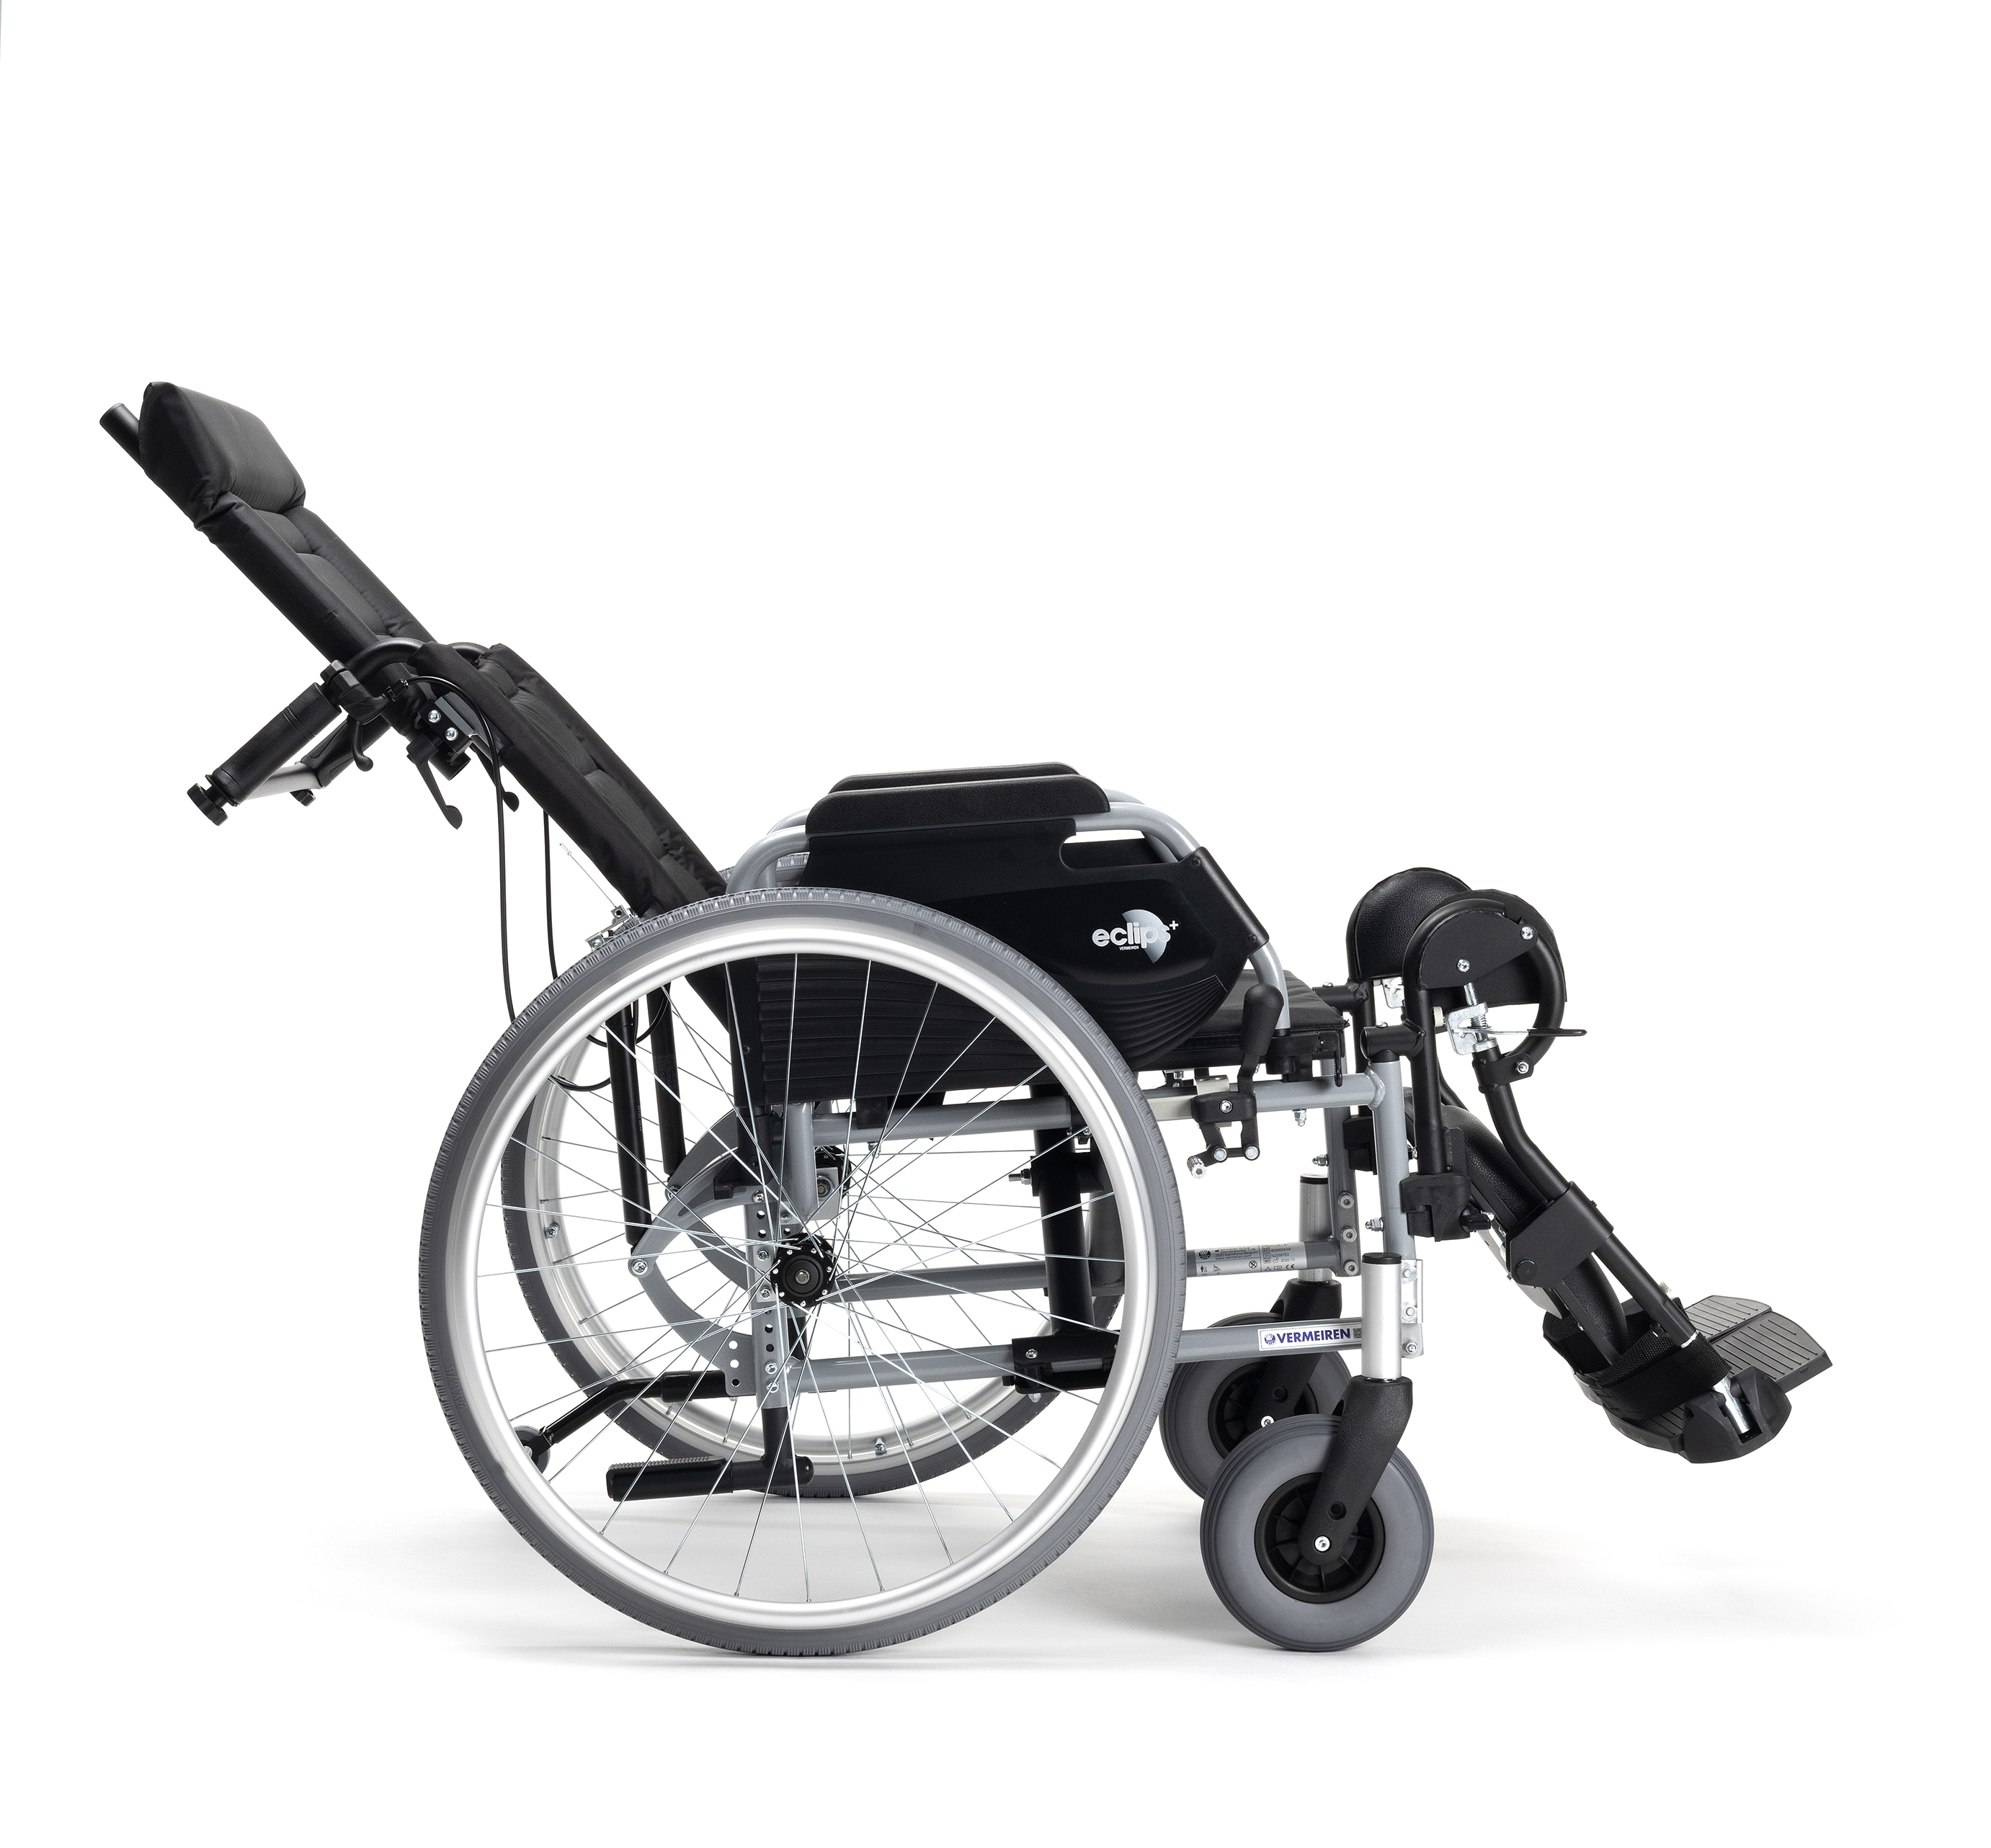 Manually Propelled Wheelchair-Reclinable 30° Eclips Plus Vermeiren